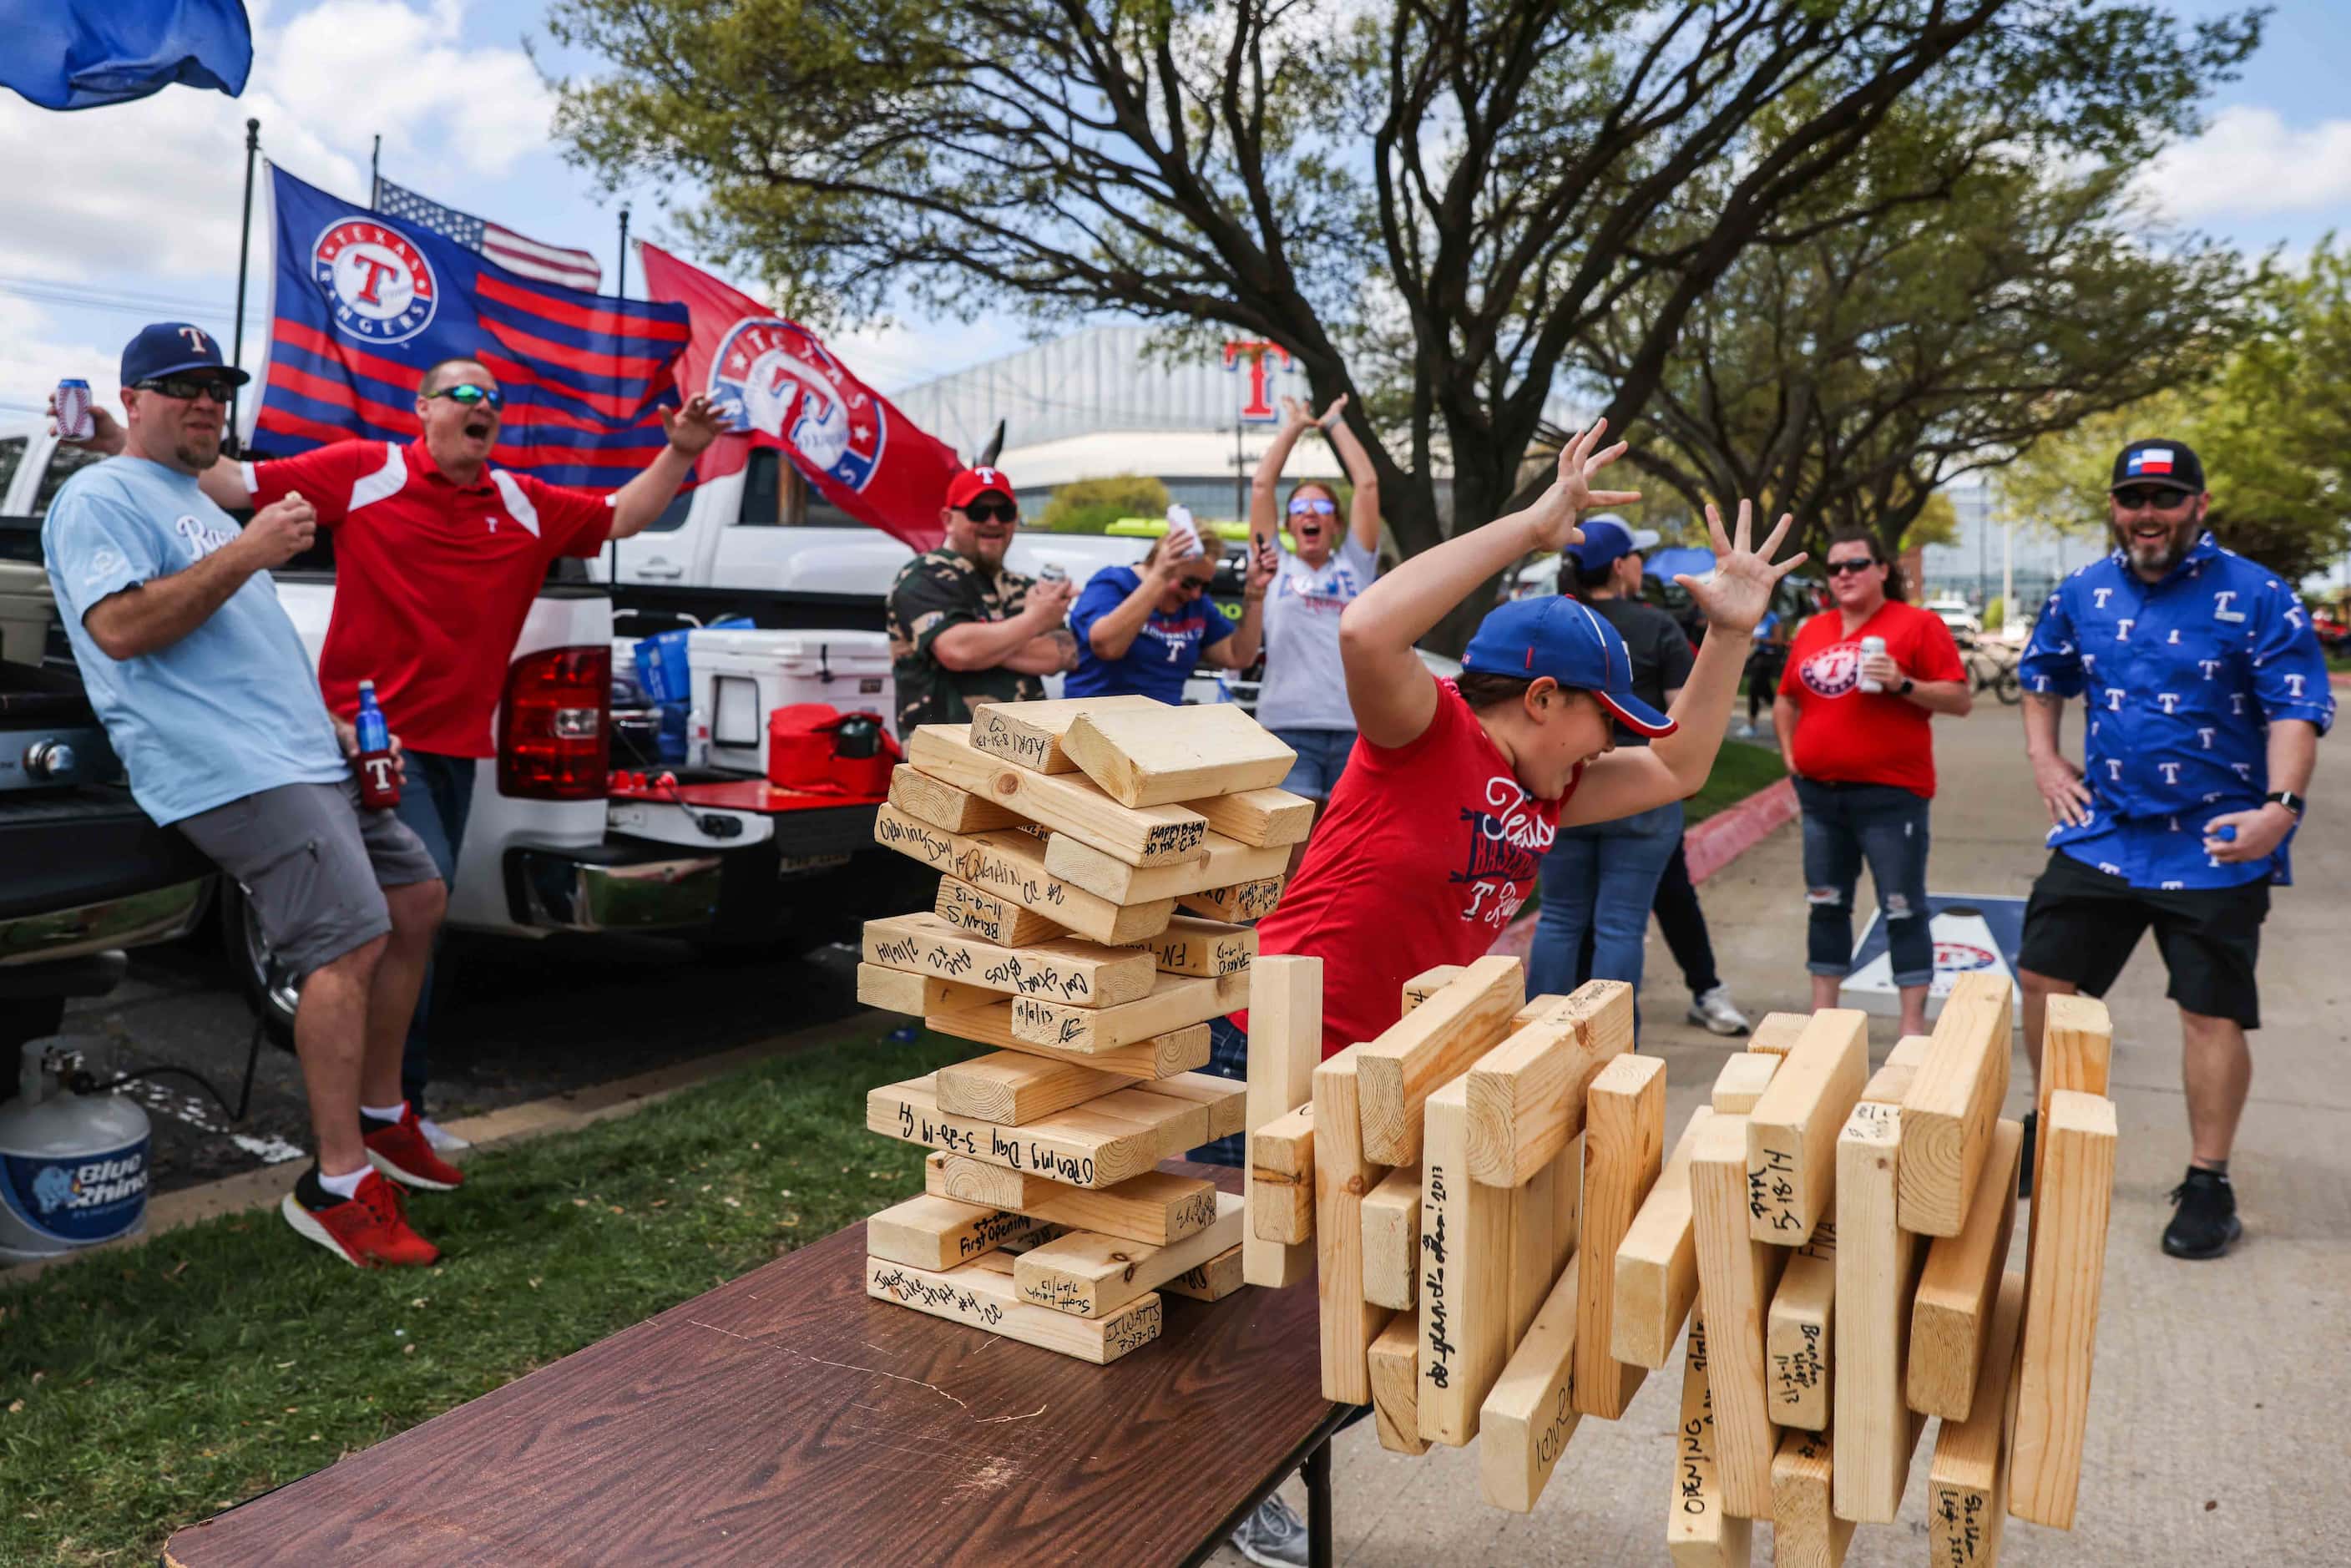 Sylar Watts, 11, reacts along with people around  as the Jenga tower falls during a...